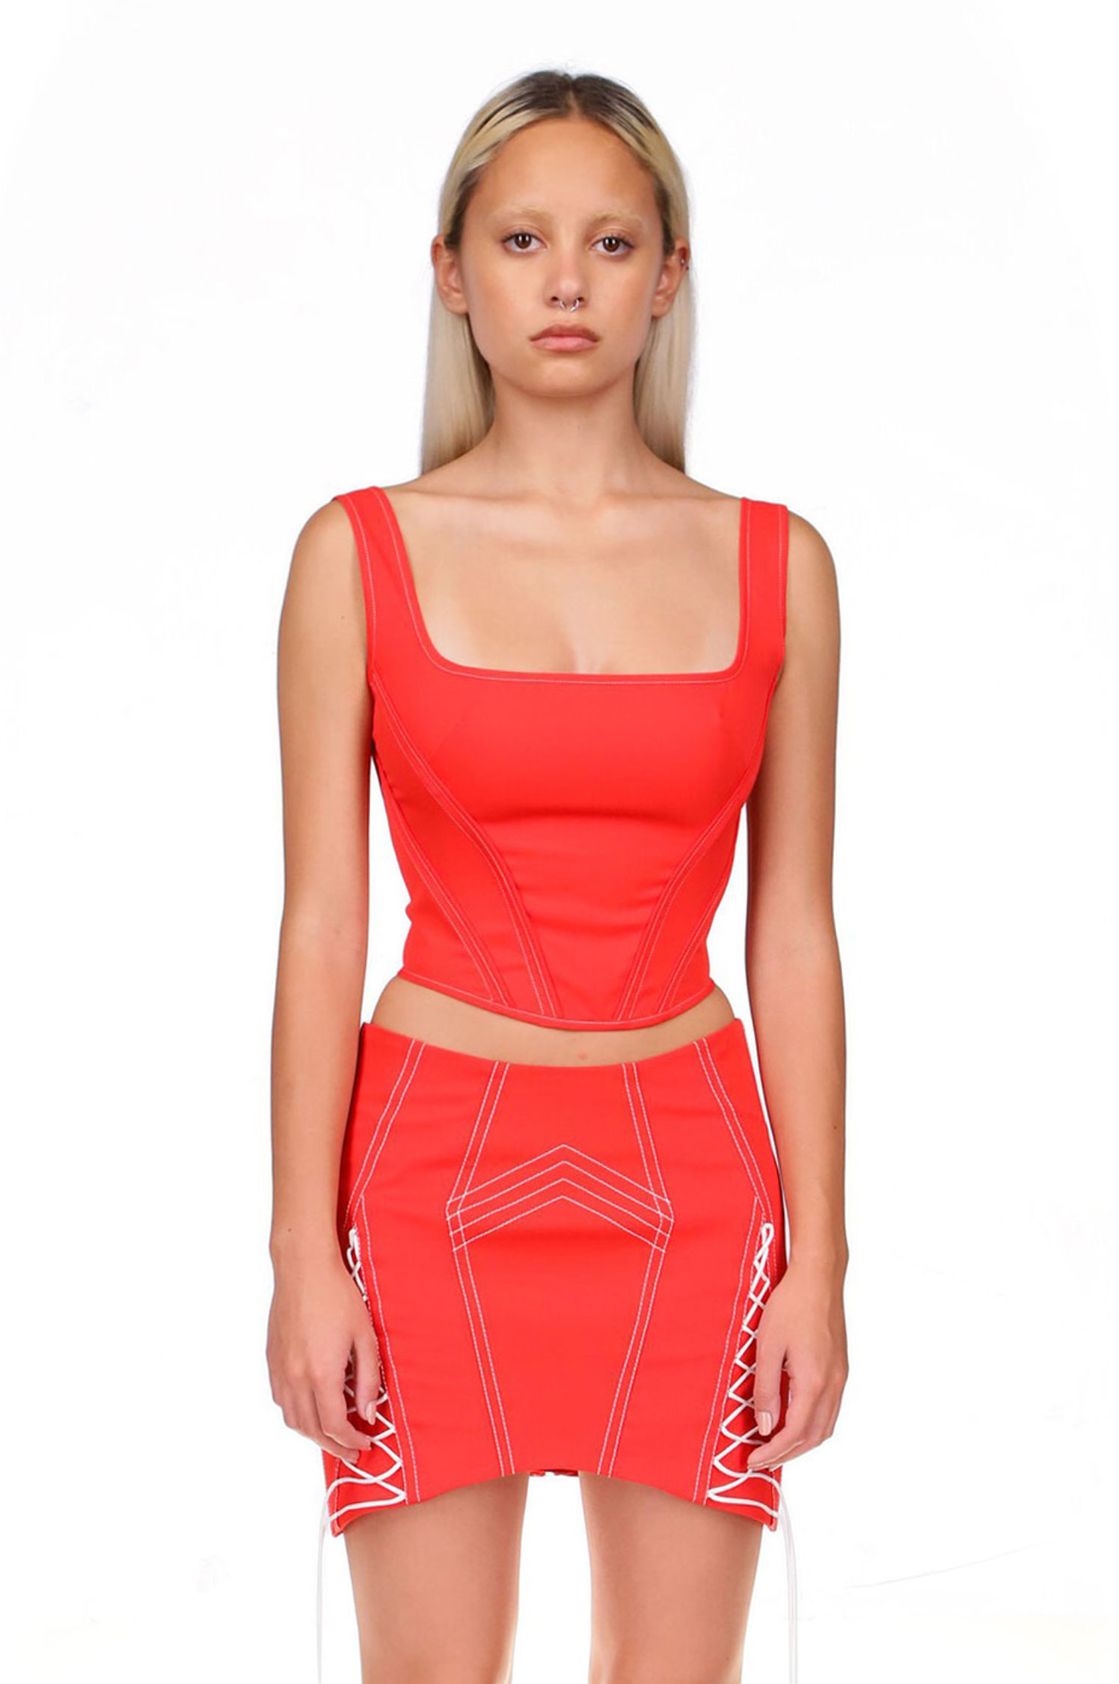 Red Corset Crop Top - Chili 